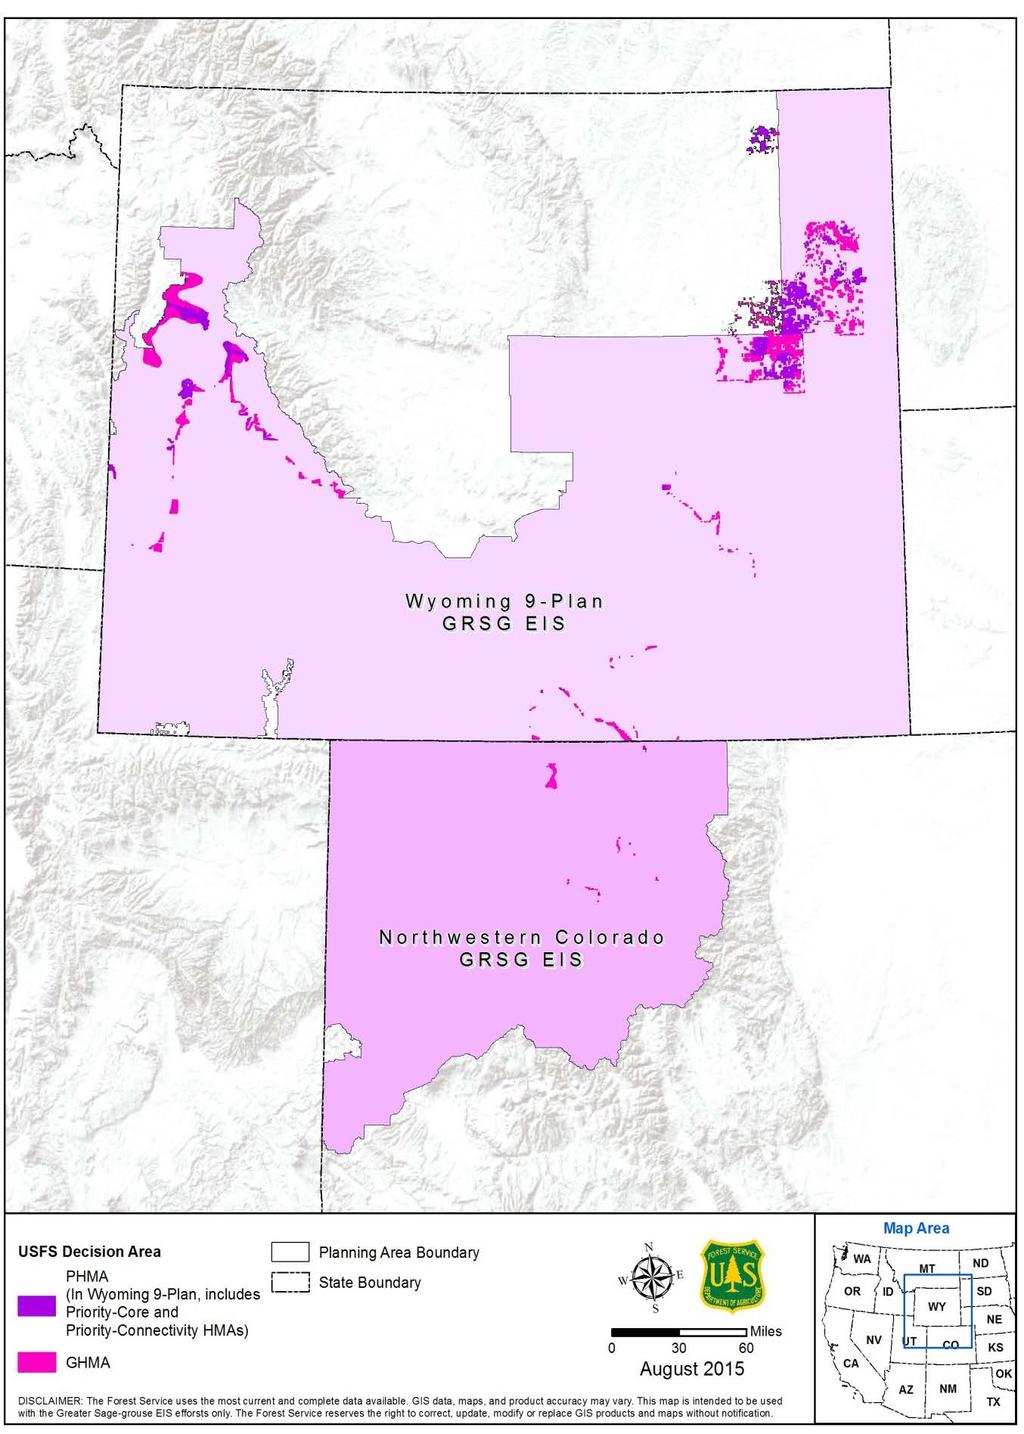 Figure 4. National Forest System Lands within the Rocky Mountain Region Decision Area.